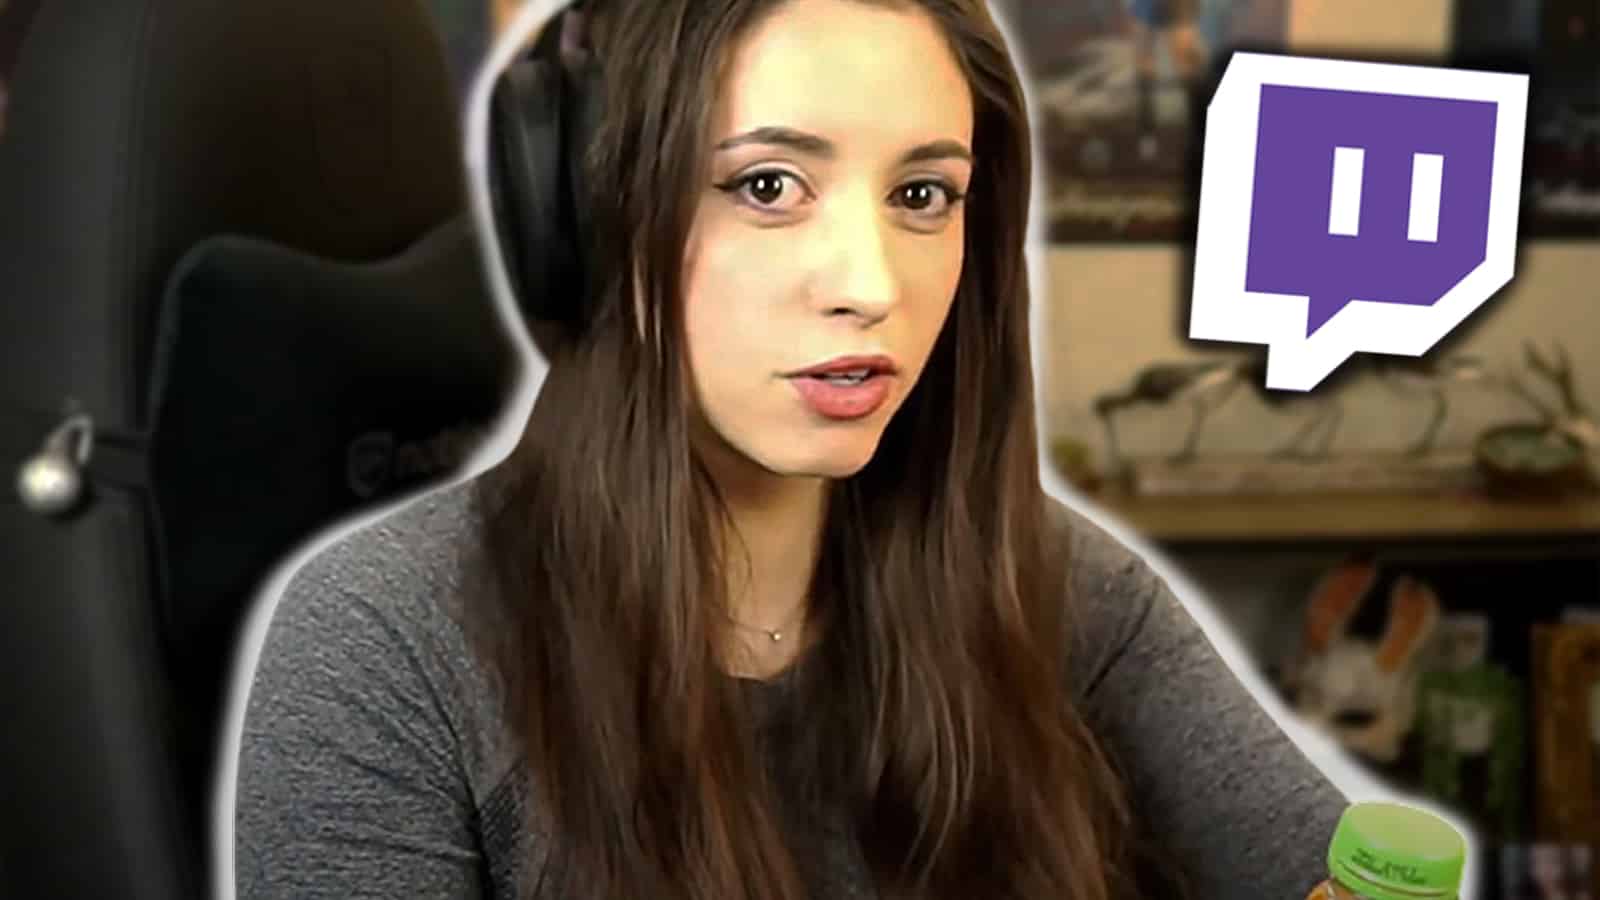 Sweet Anita considers quitting twitch